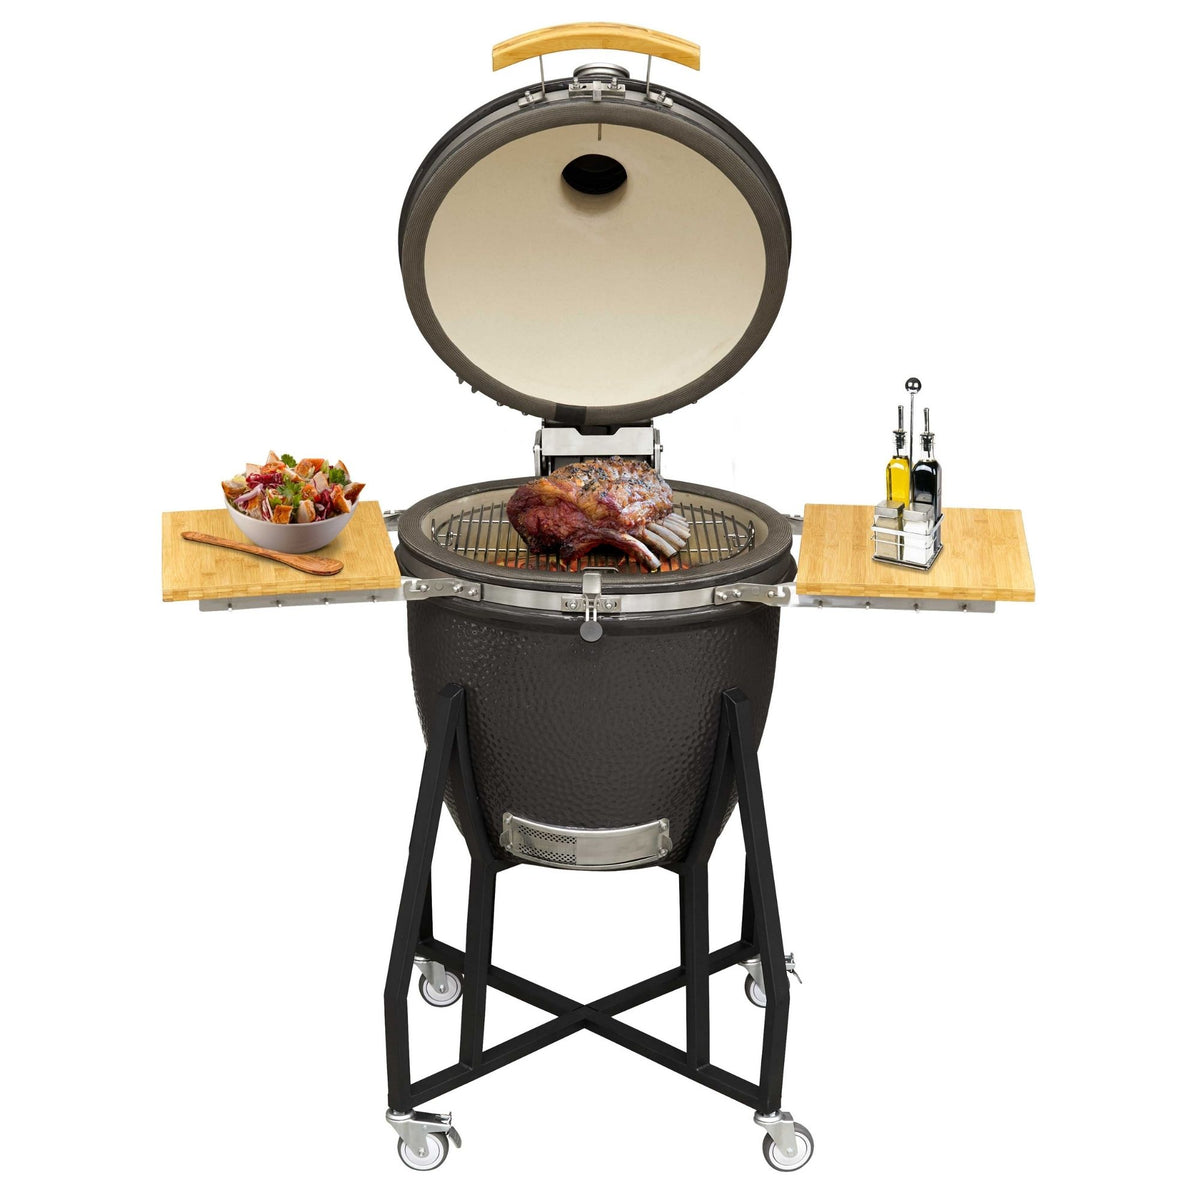 Zullen Zwart Won Deluxe Kamado Style BBQ Grill, Oven, Smoker with Wheeled Stand, Cerami -  Dellonda